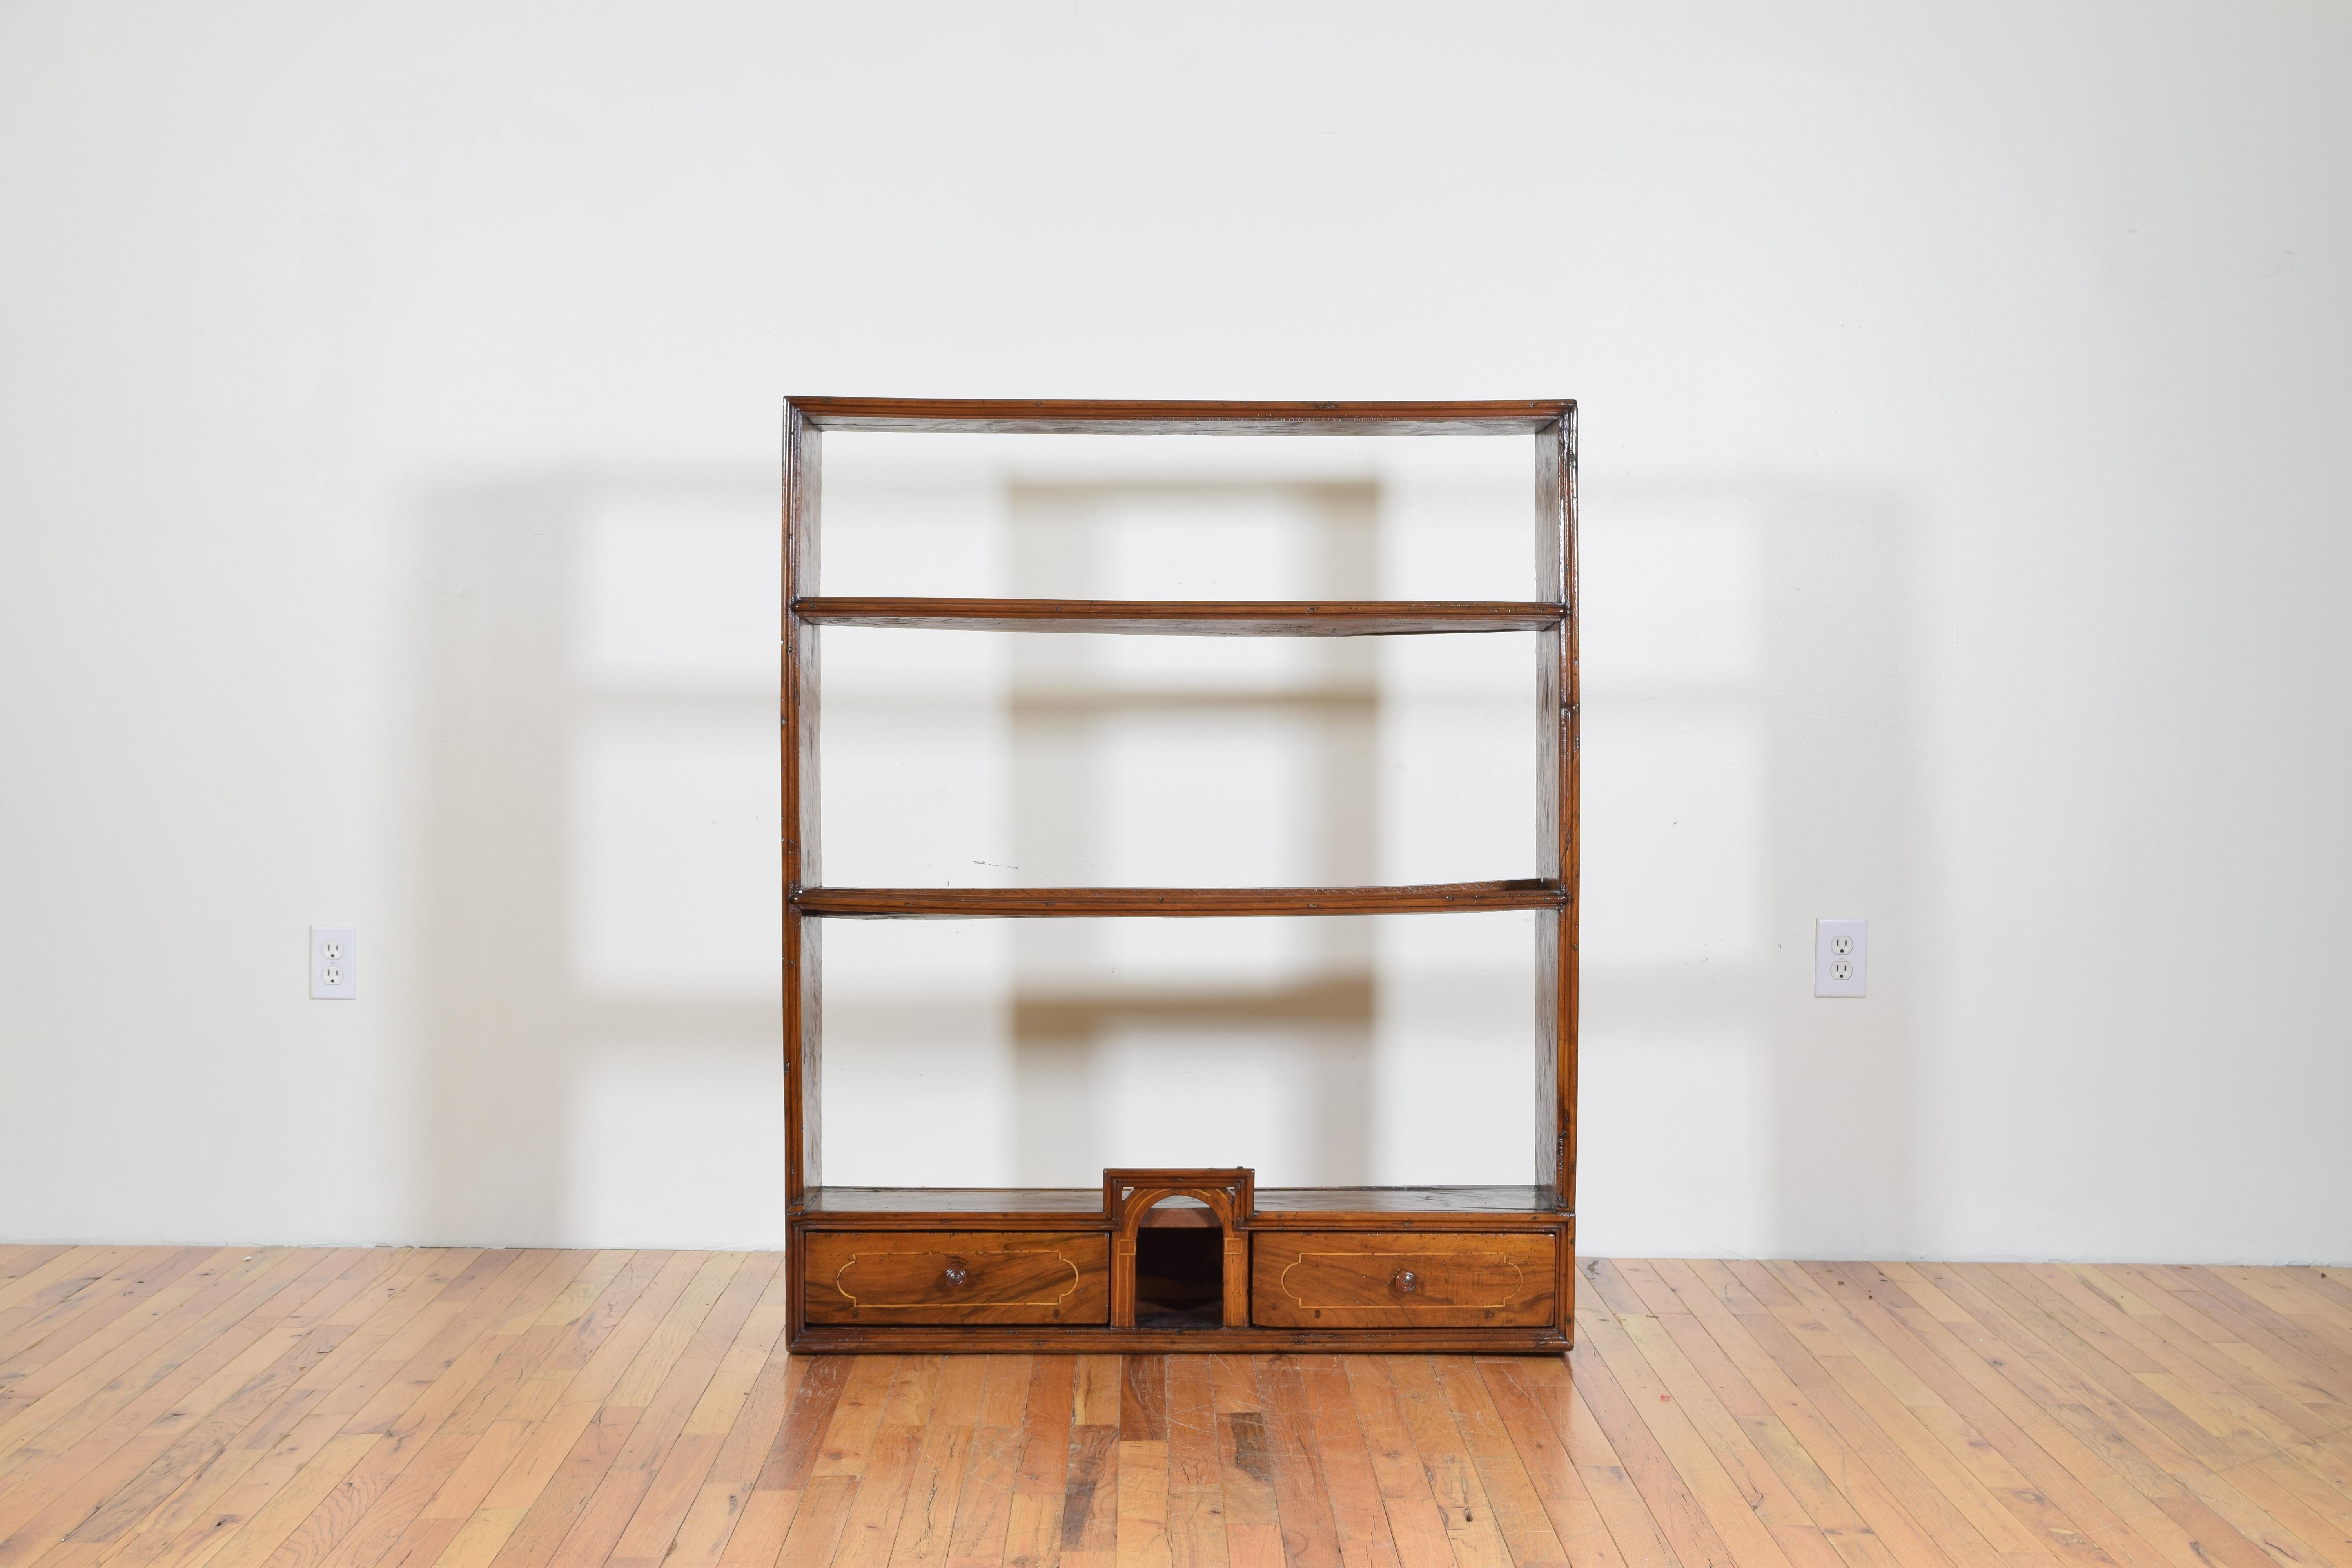 The frame with inlaid sides with a bottom storage section housing two inlaid drawers and a centred open section with over-arch, the shelves with plate rests.